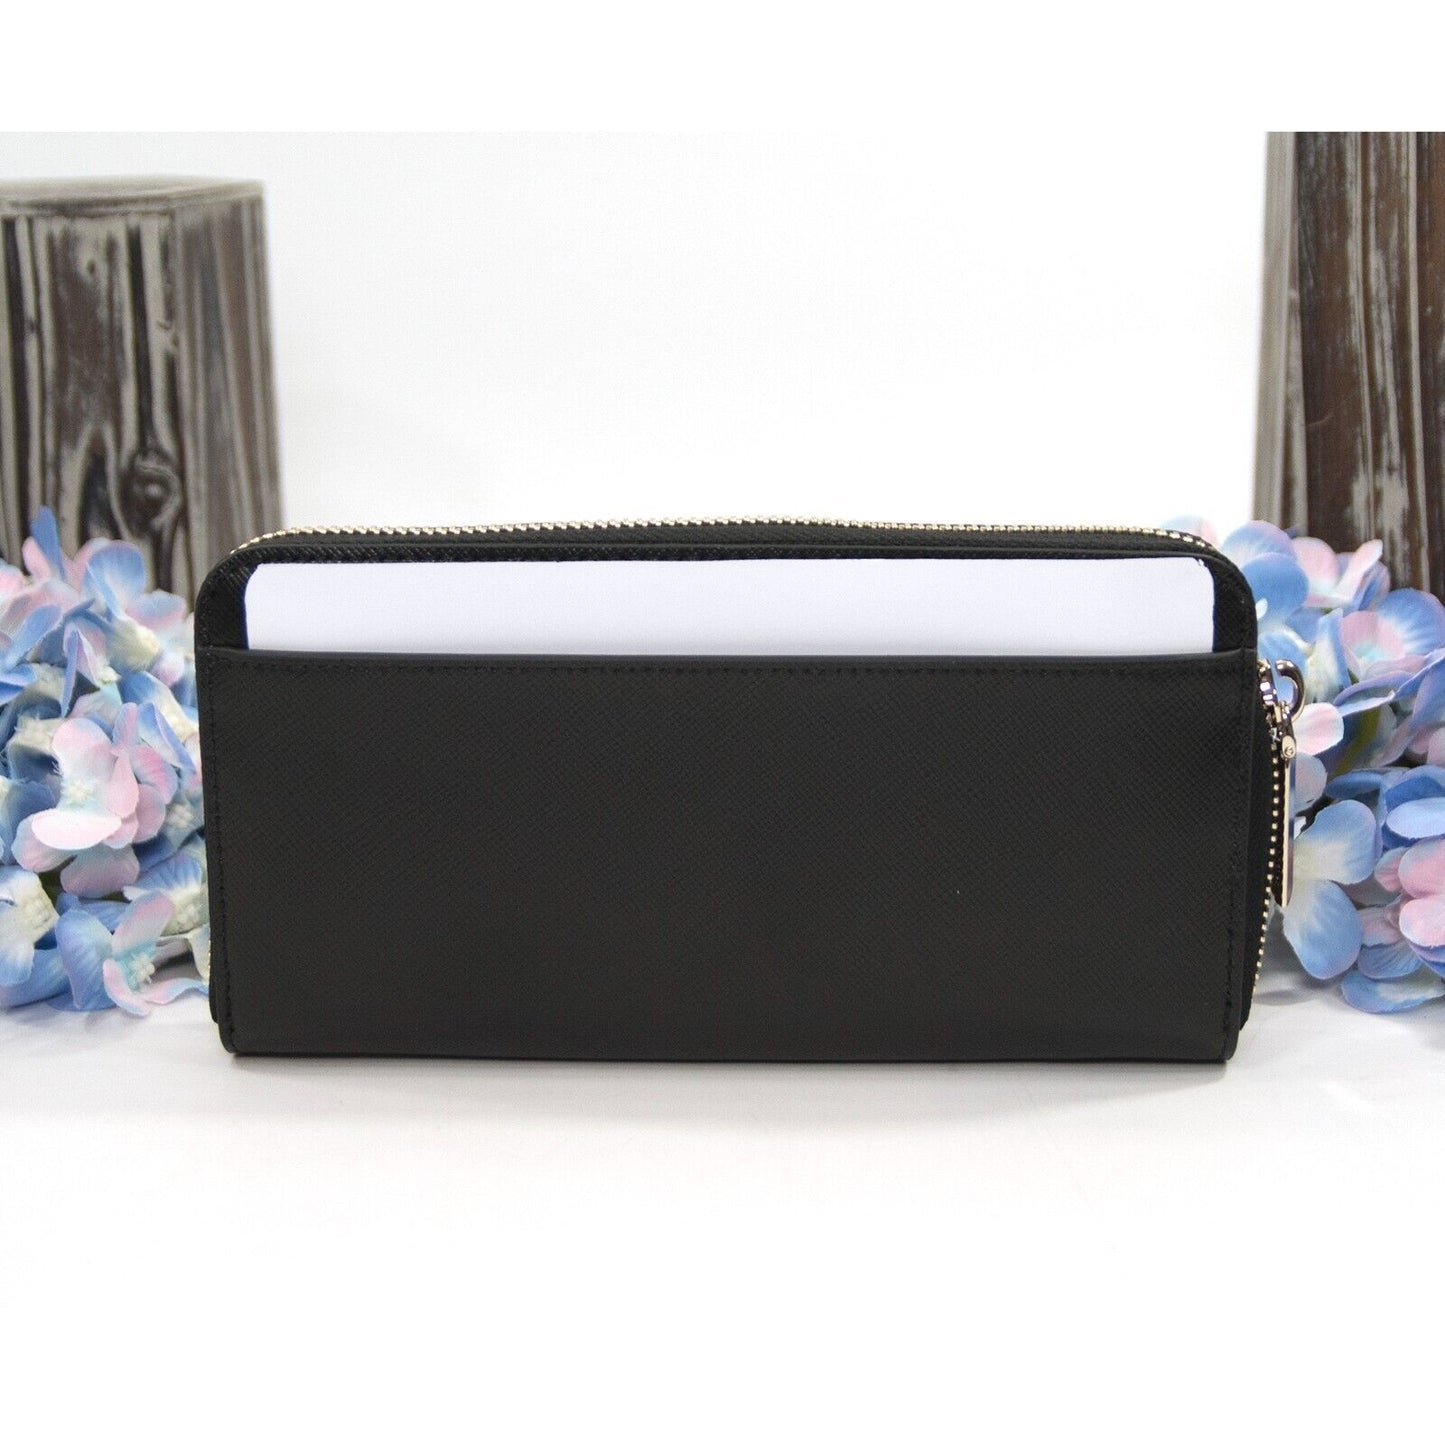 Kate Spade Spencer Black Leather Zip Around Large Continetal Lacey Wallet NWT